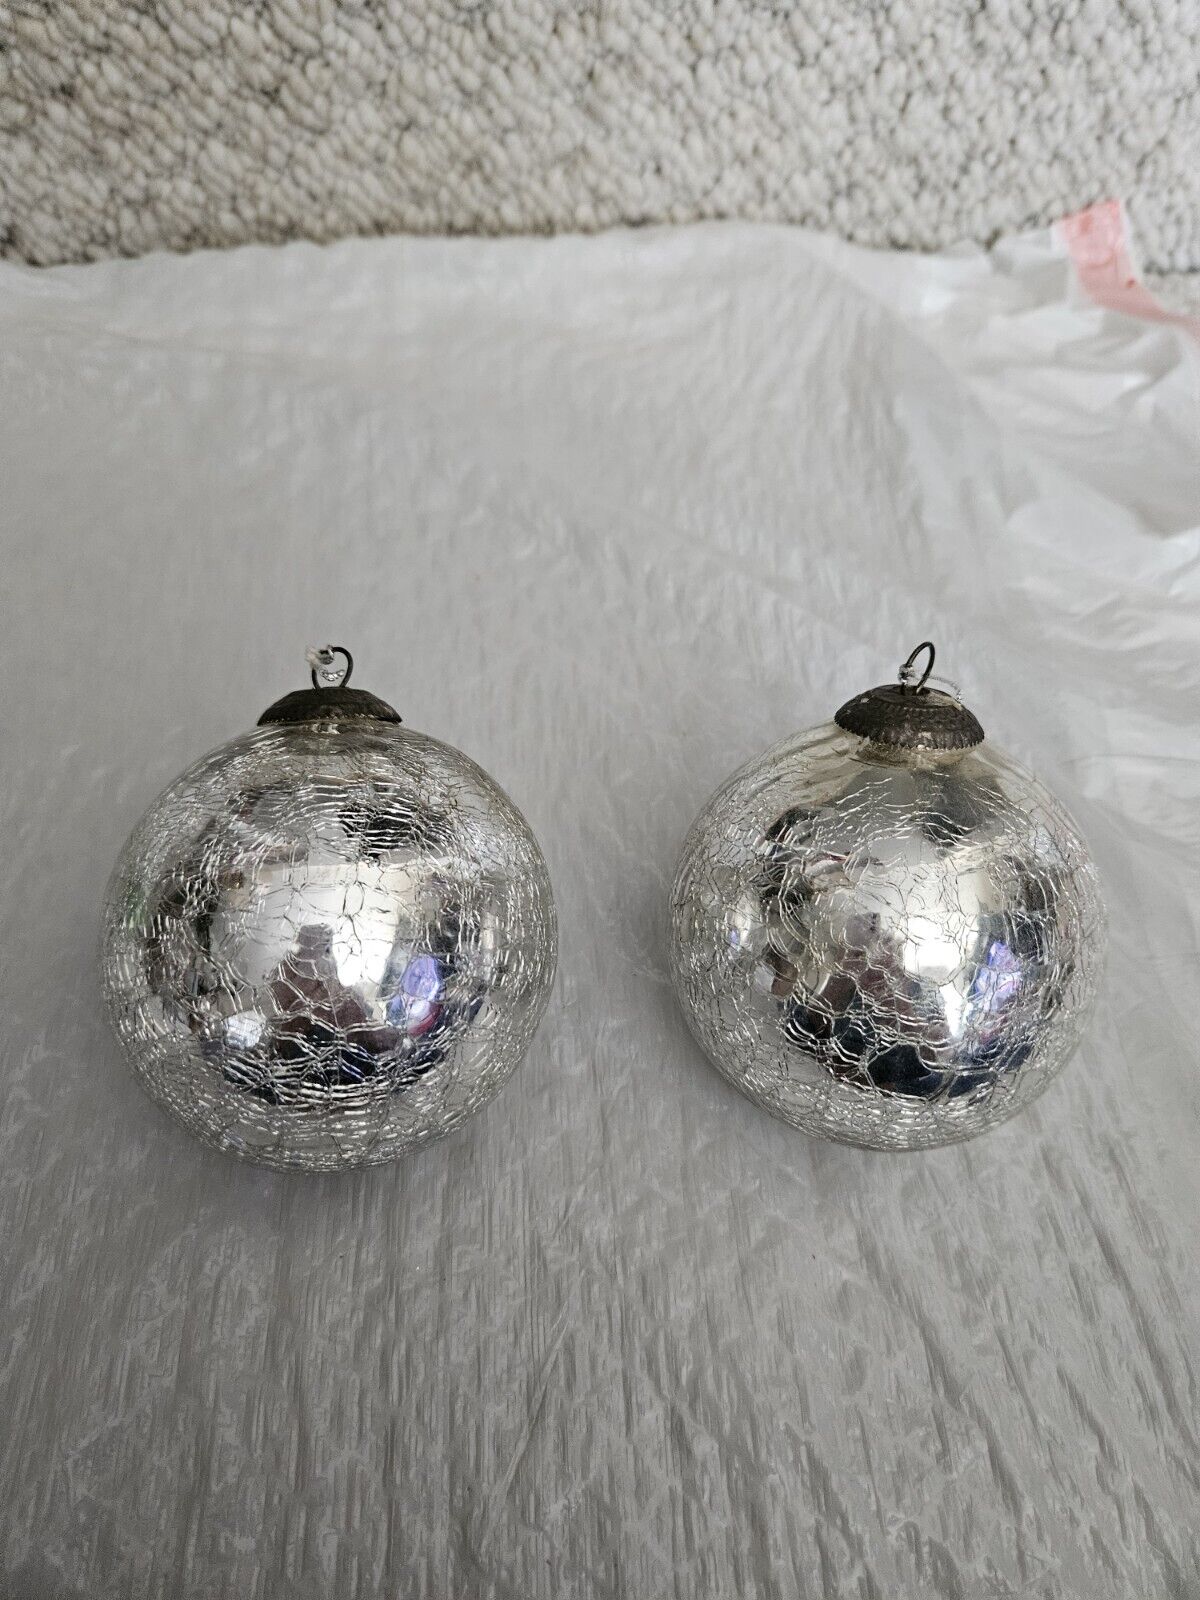 2 Vintage Christmas Ornaments Kugel Style 4” Heavy Crackle Glass Silver 